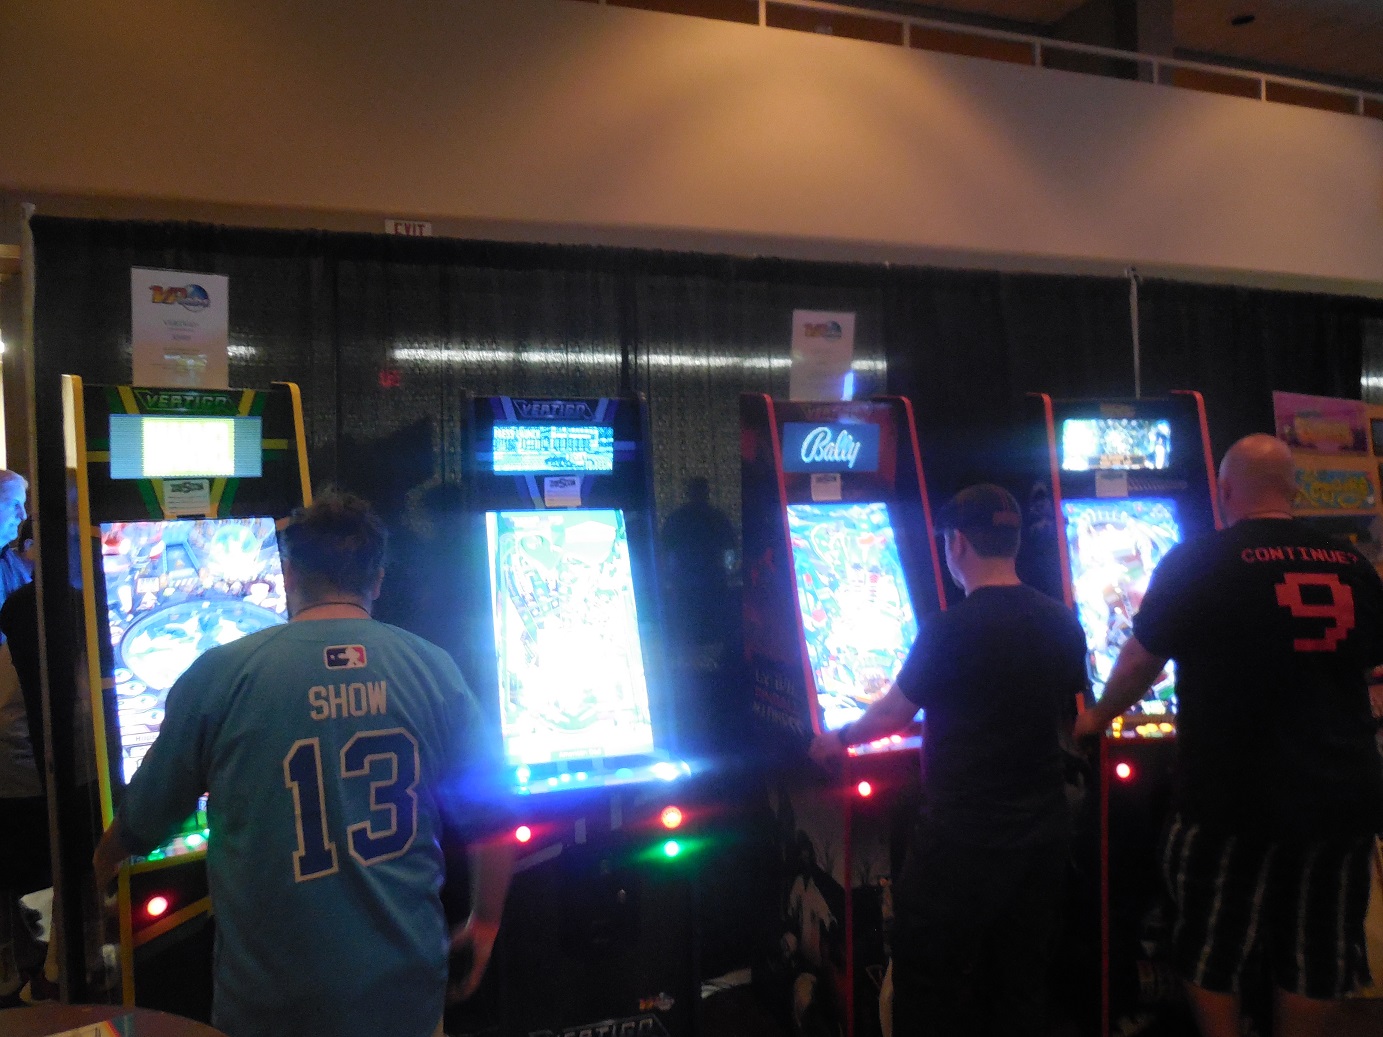 Fans also raved about these upright video pinball games. They sold out before the weekend was even finished!